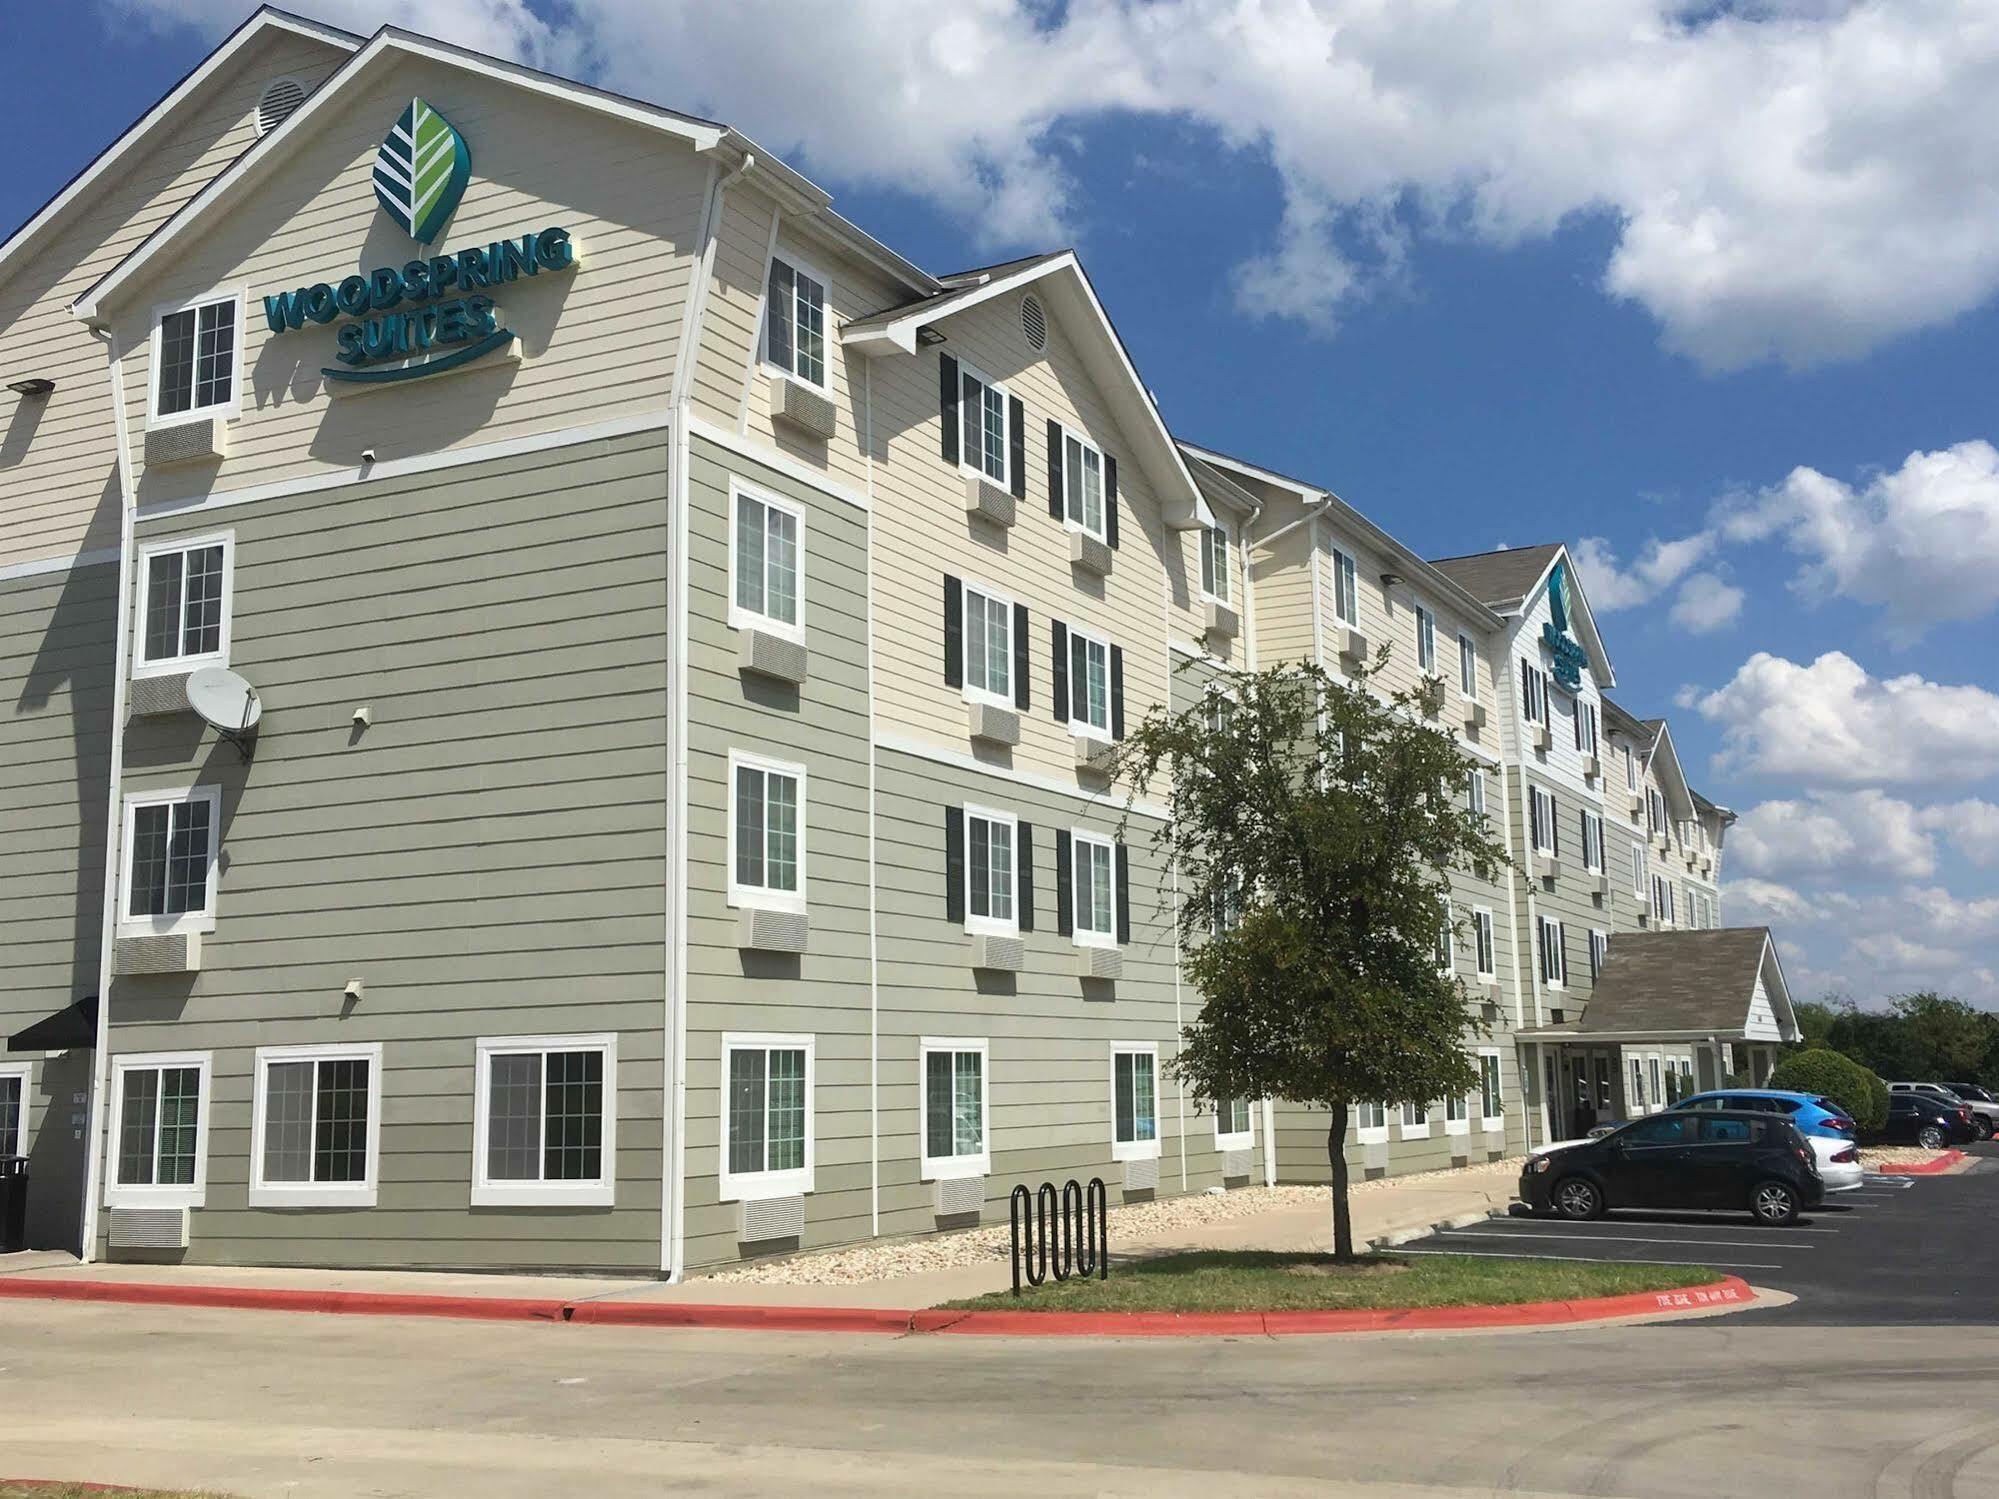 Woodspring Suites Louisville Southeast Forest Hills Экстерьер фото